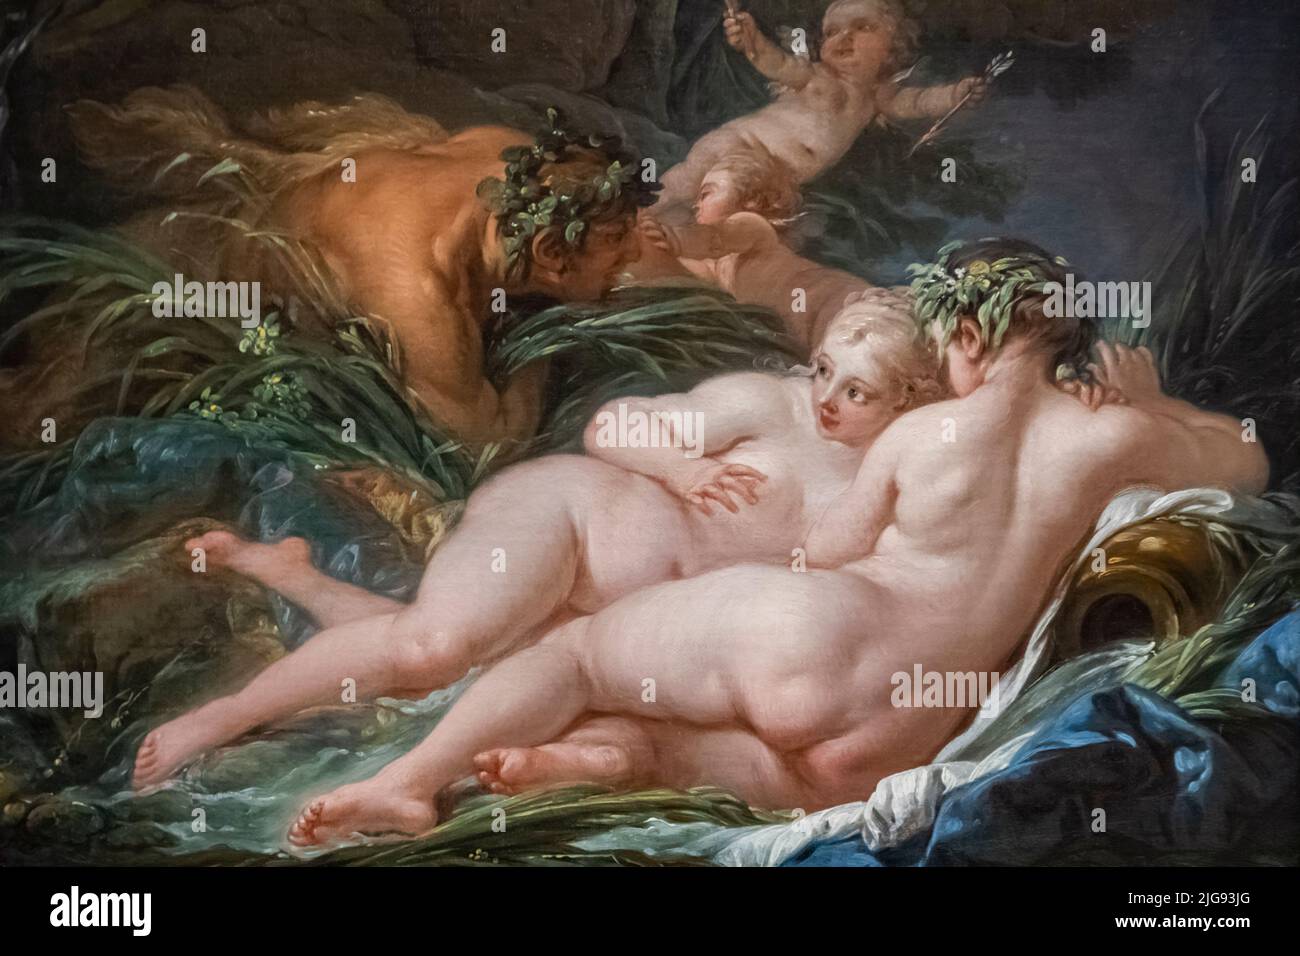 Painting titled 'Pan and Syrinx' by French Artist Francois Boucher dated 1759 Stock Photo